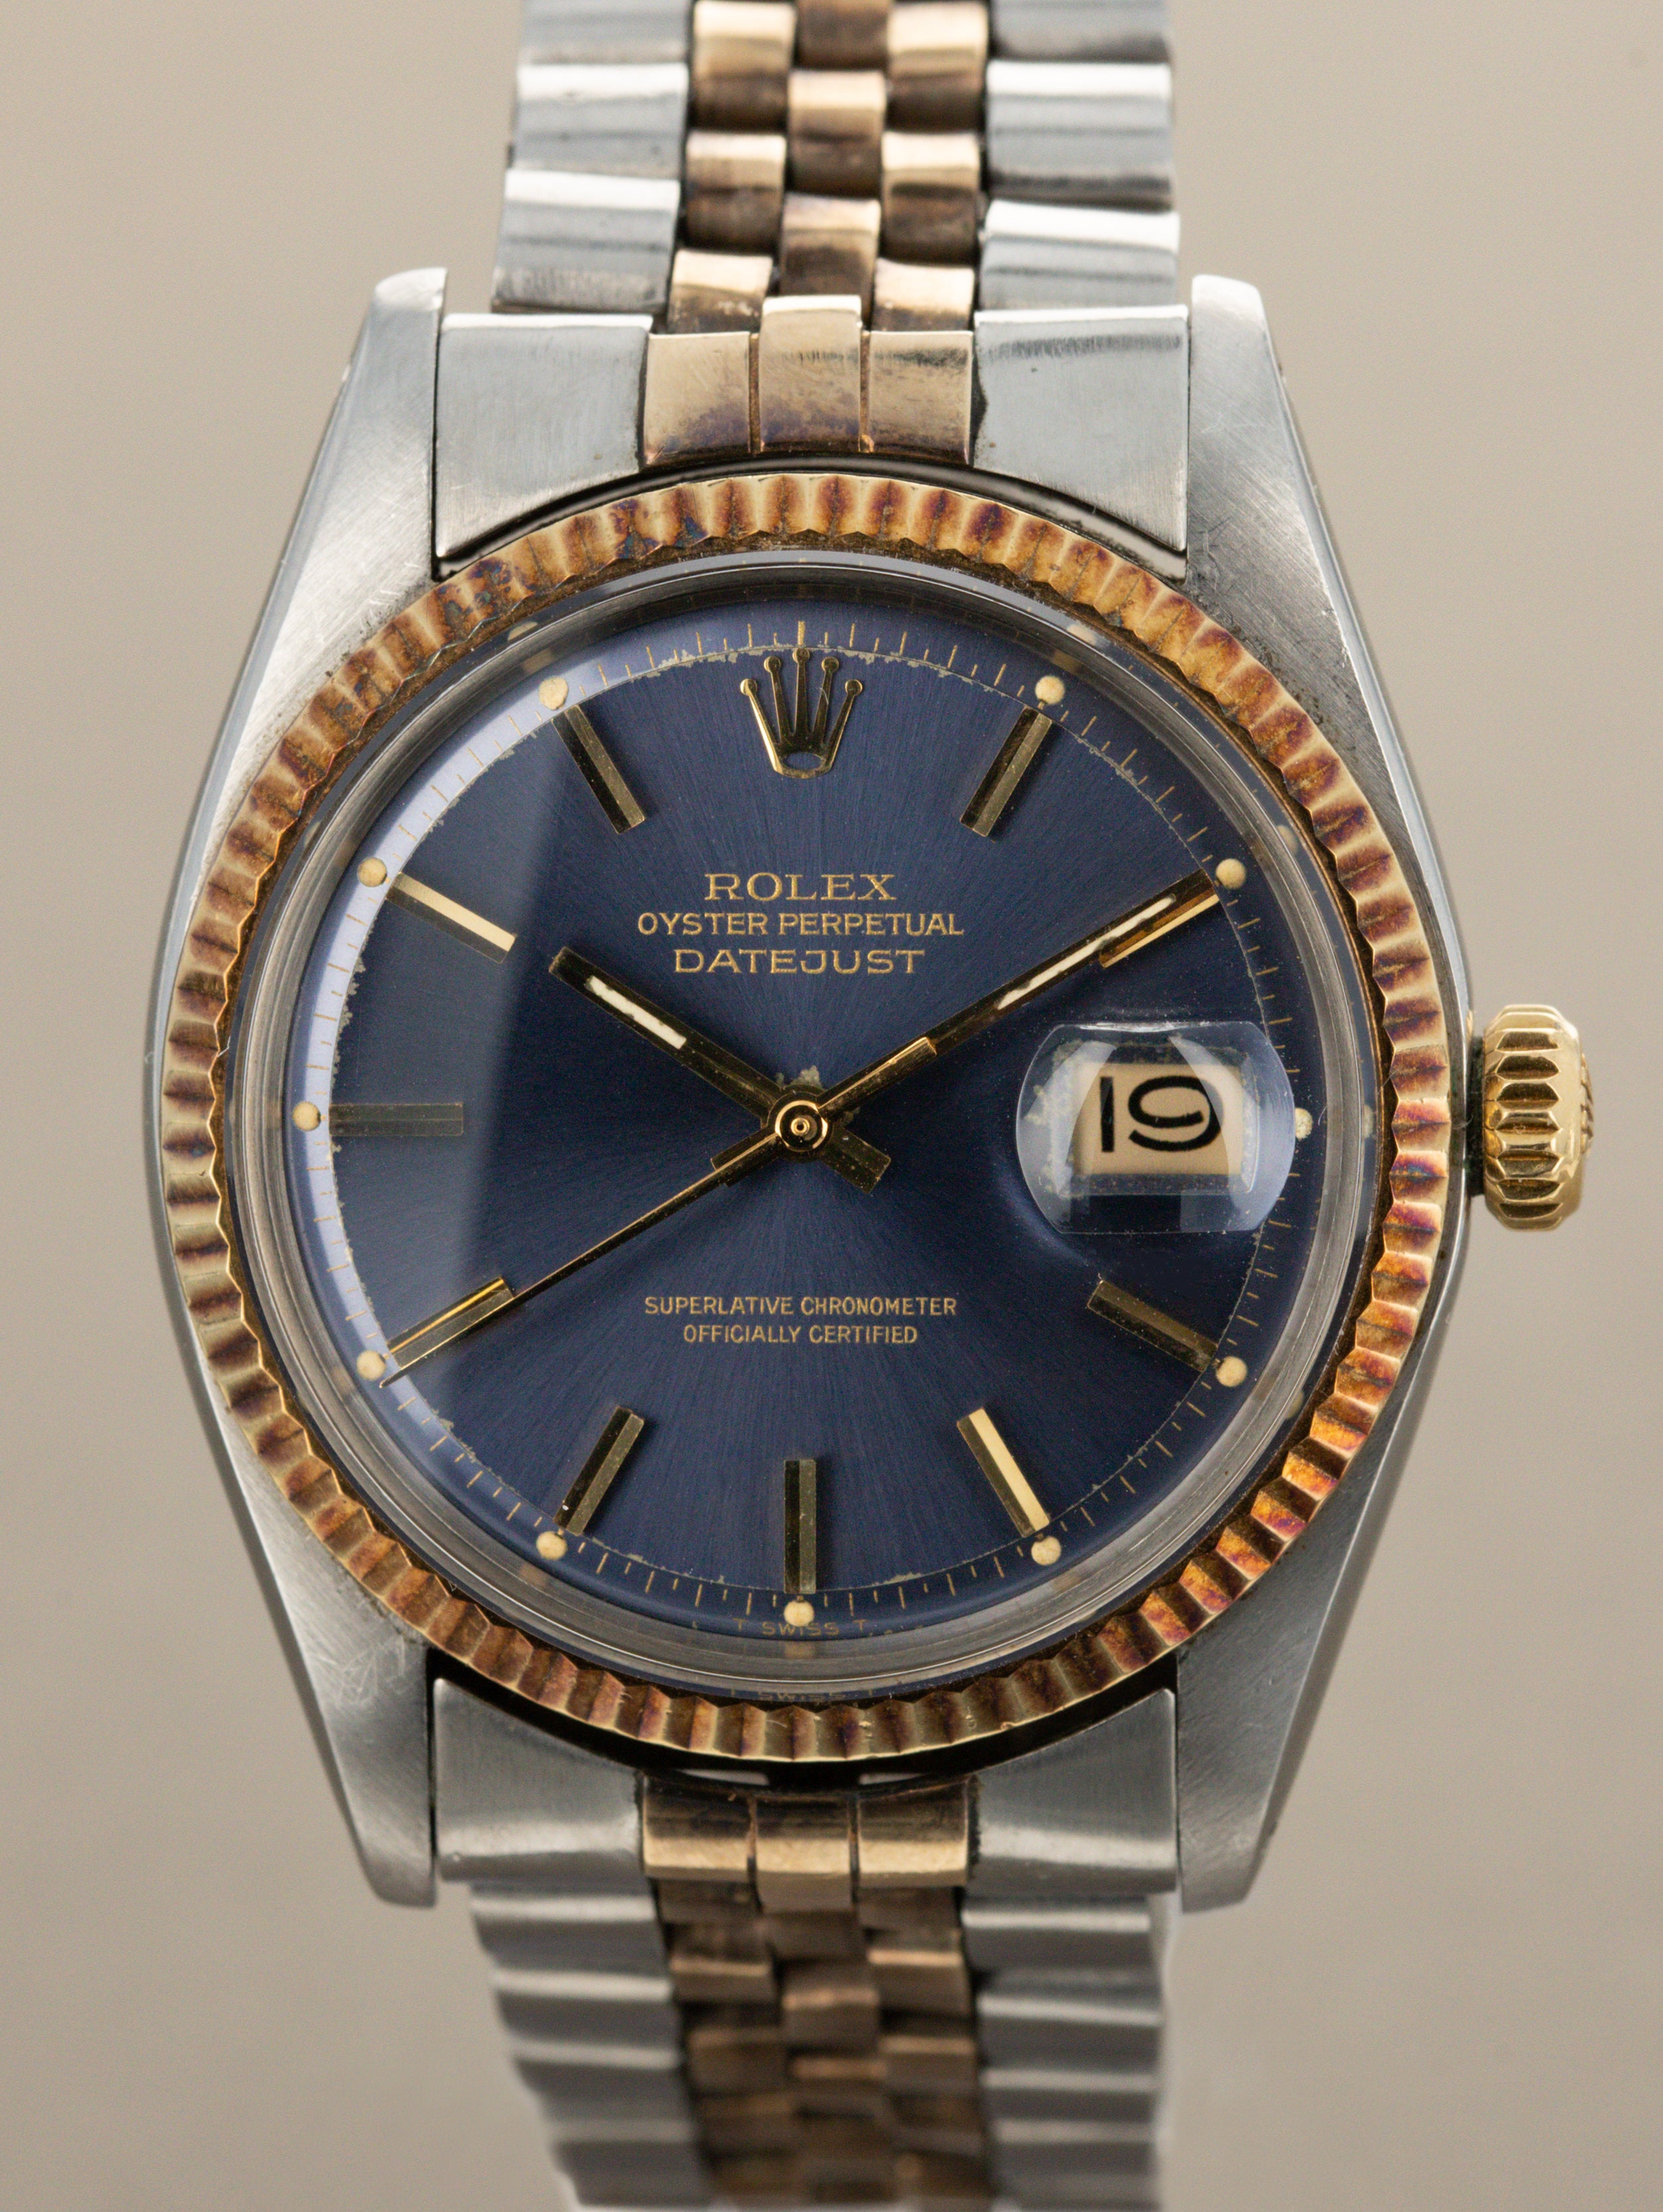 Rolex Datejust Ref. 1601 - Two-Tone Blue Dial